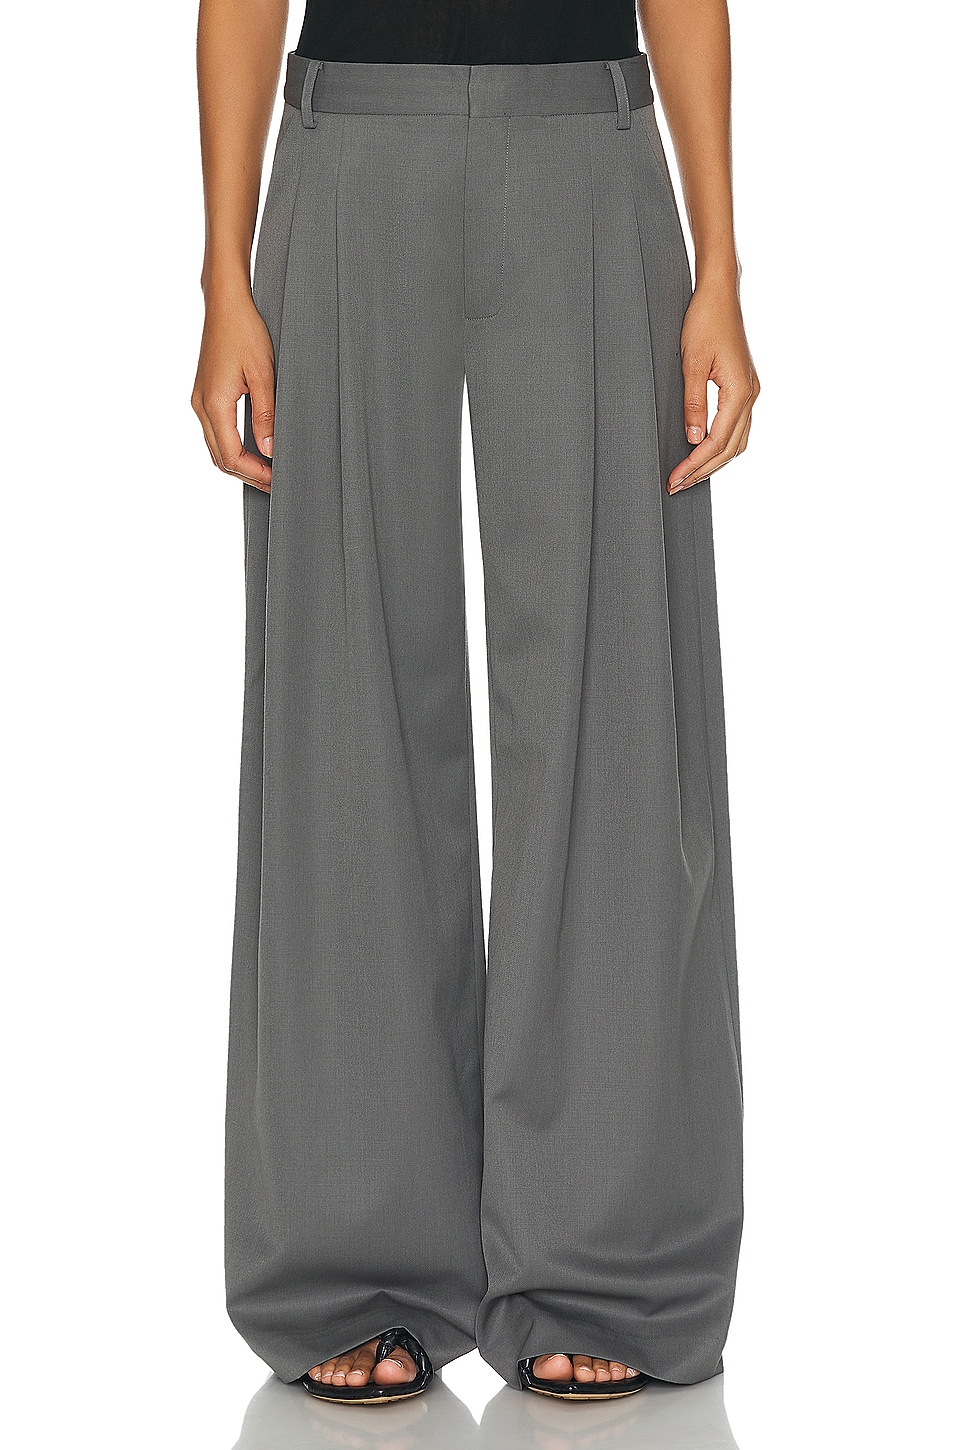 Image 1 of St. Agni Homme Pleat Pants in Pewter Grey